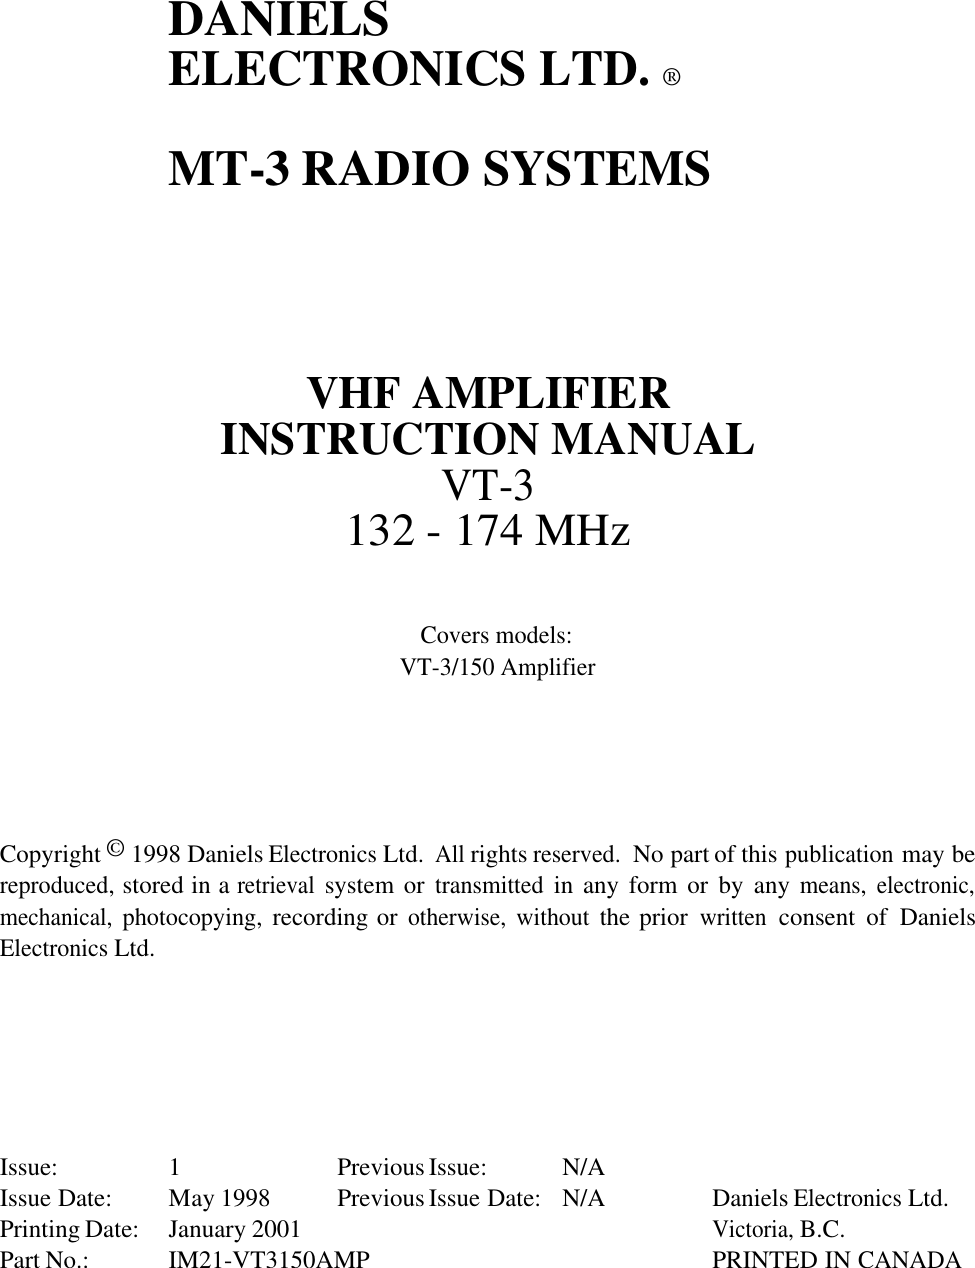 DANIELSELECTRONICS LTD. ®MT-3 RADIO SYSTEMSVHF AMPLIFIERINSTRUCTION MANUALVT-3132 - 174 MHzCovers models:VT-3/150 AmplifierCopyright © 1998 Daniels Electronics Ltd.  All rights reserved.  No part of this publication may bereproduced, stored in a retrieval system or transmitted in any form or  by  any means, electronic,mechanical, photocopying, recording or otherwise, without the prior written consent  of  DanielsElectronics Ltd.Issue: 1 Previous Issue: N/AIssue Date: May 1998 Previous Issue Date: N/A Daniels Electronics Ltd.Printing Date: January 2001Victoria, B.C.Part No.: IM21-VT3150AMP PRINTED IN CANADA